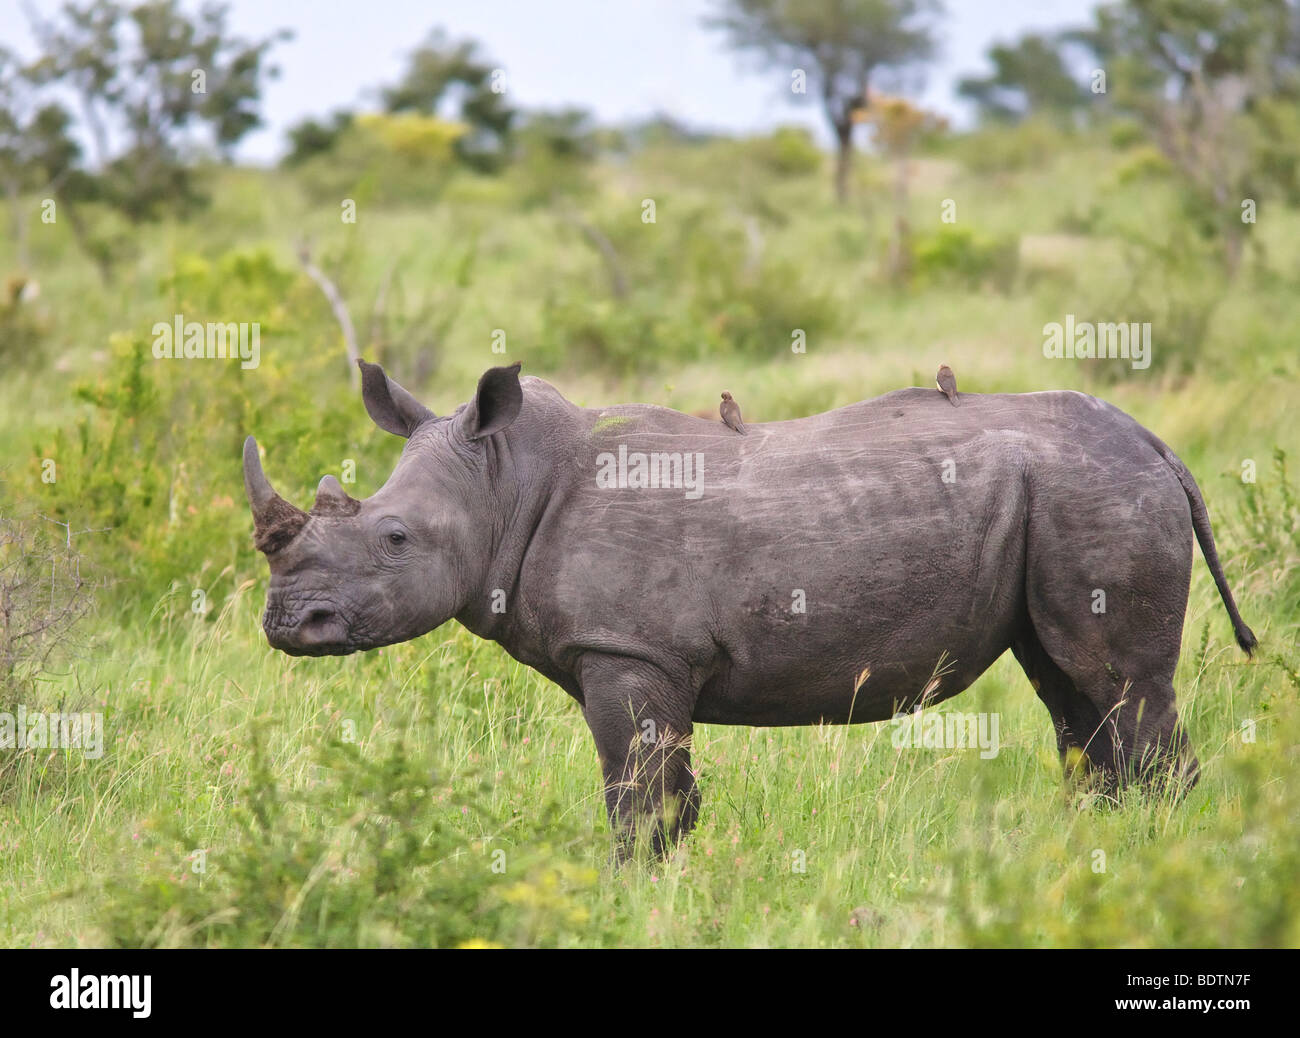 White rhinoceros (Ceratotherium simum) square-lipped rhinoceros with Oxpeckers. An endangered species in Kruger National Park, South Africa. Stock Photo